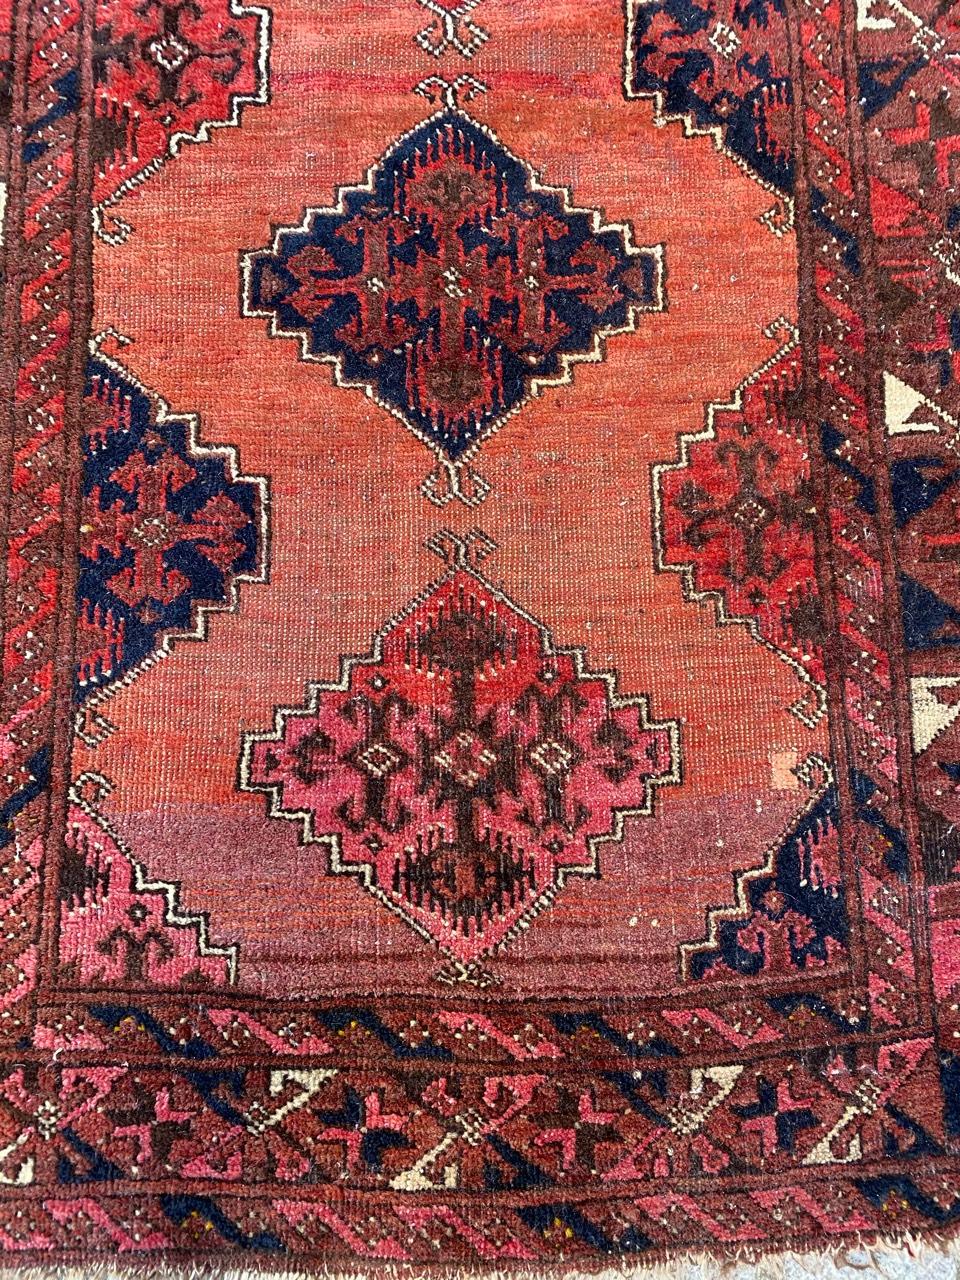 Exquisite late 19th-century Turkmen rug featuring a stunning tribal design and vibrant natural colors. Meticulously hand-knotted with wool velvet on a wool foundation. Timeless beauty for your space.

✨✨✨
